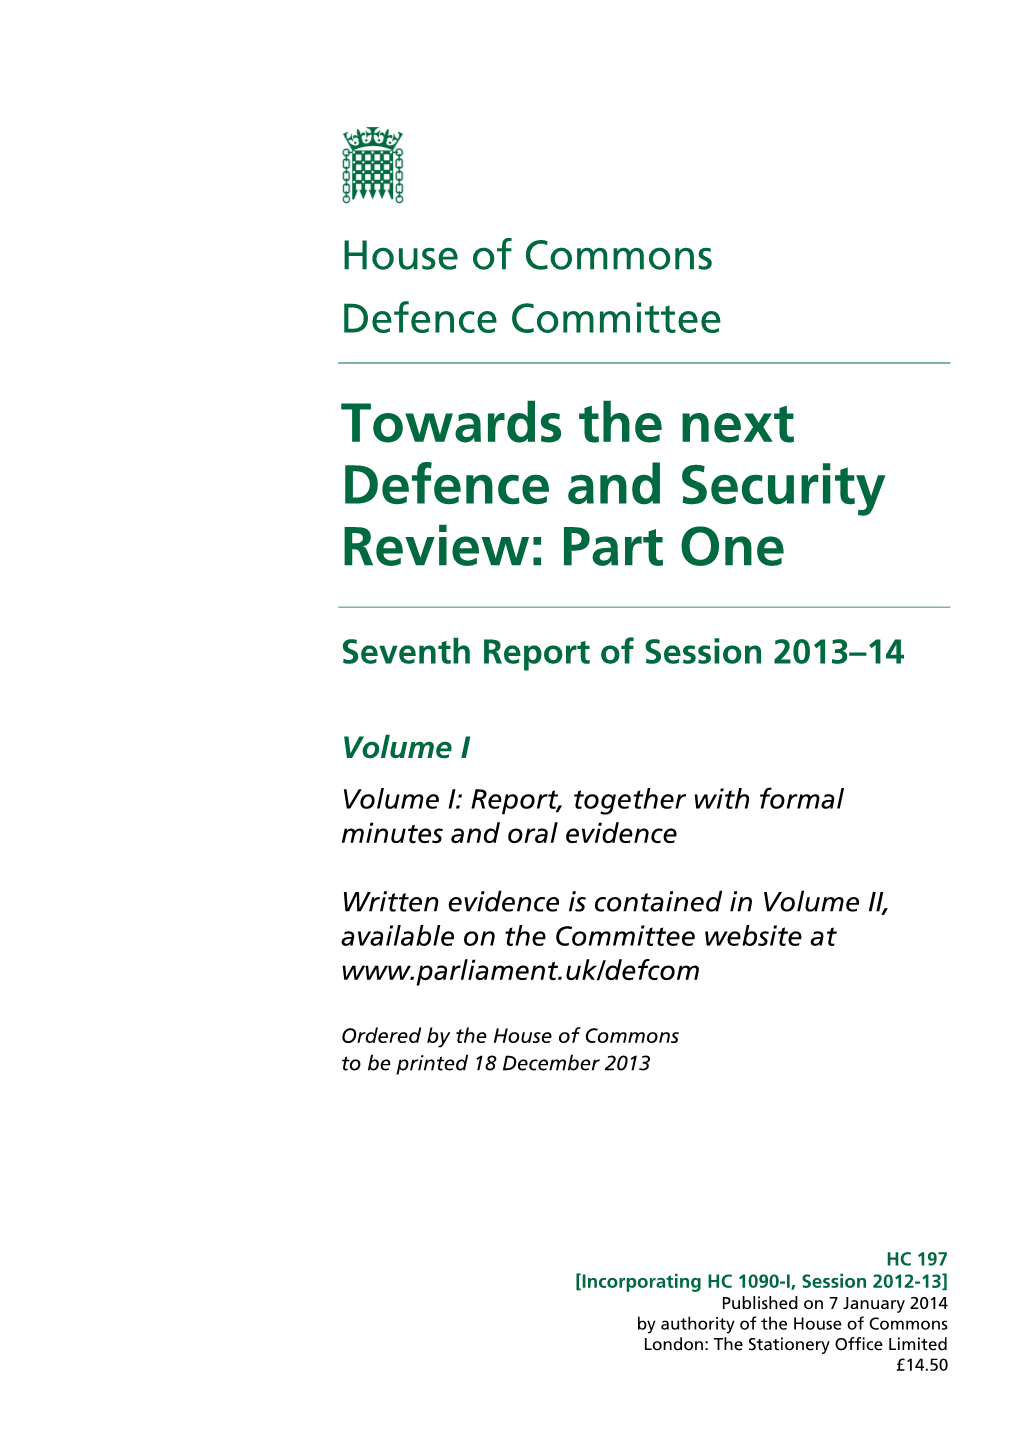 Towards the Next Defence and Security Review: Part One